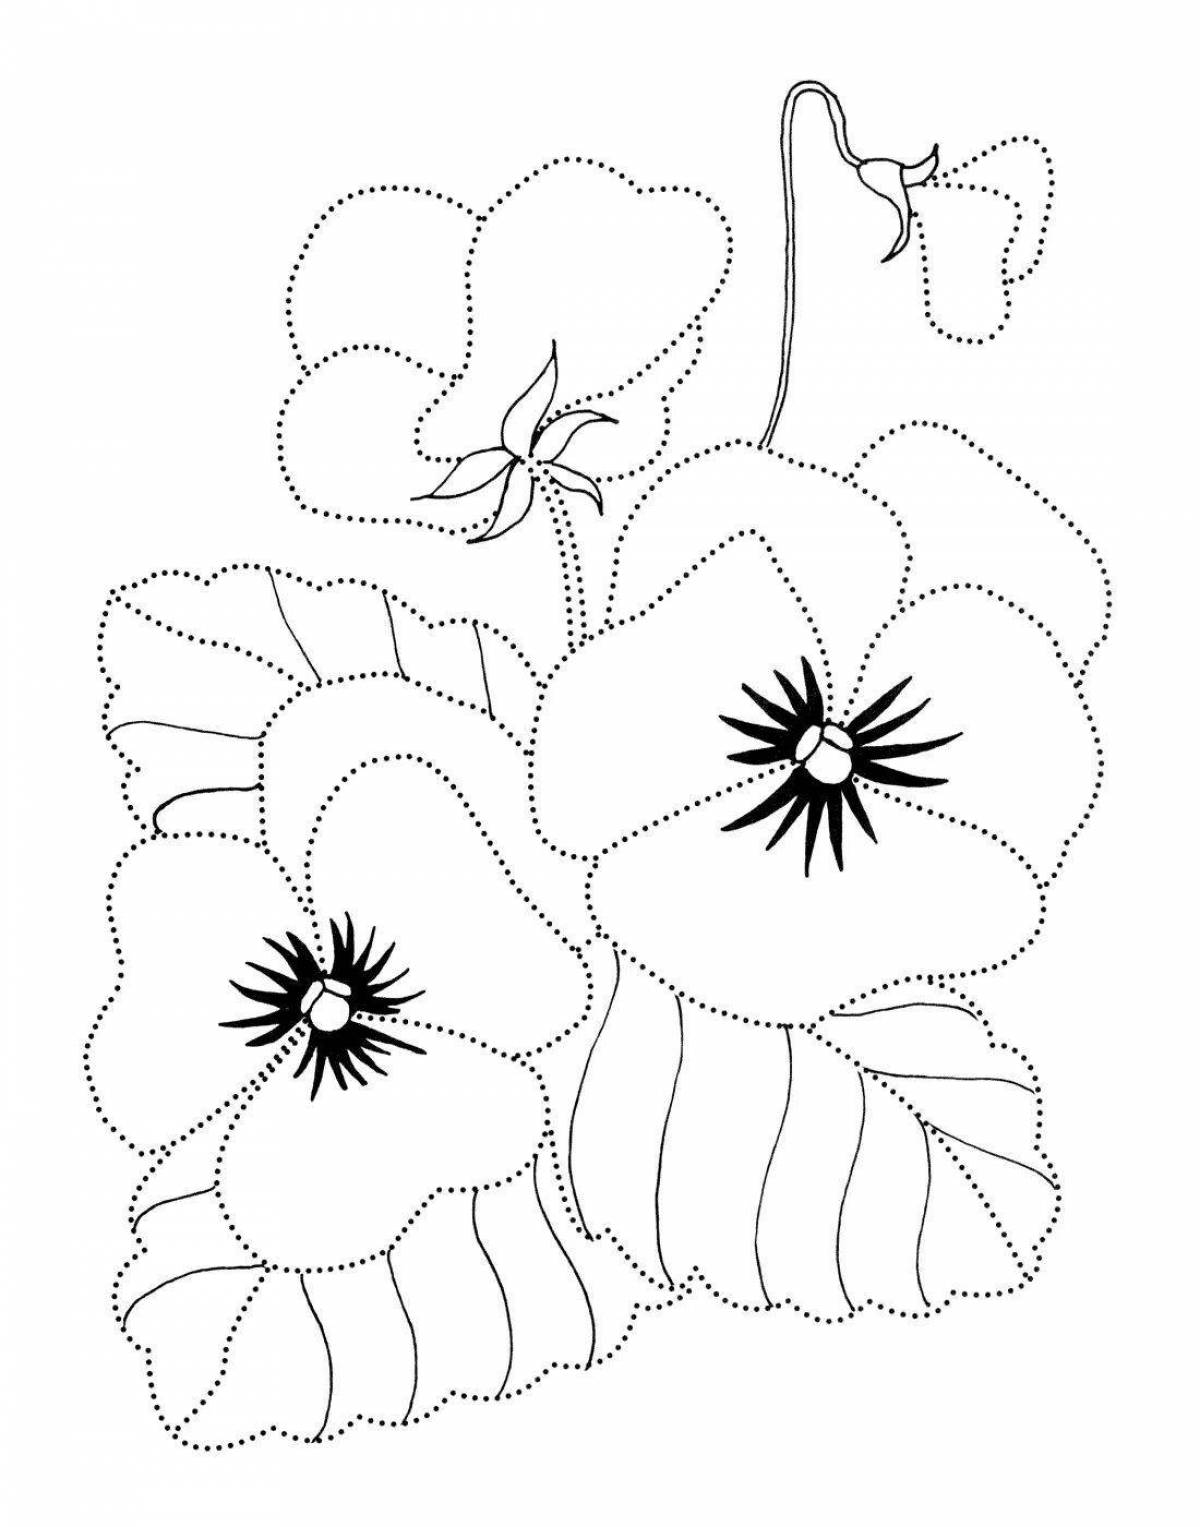 Delightful purple flower coloring page